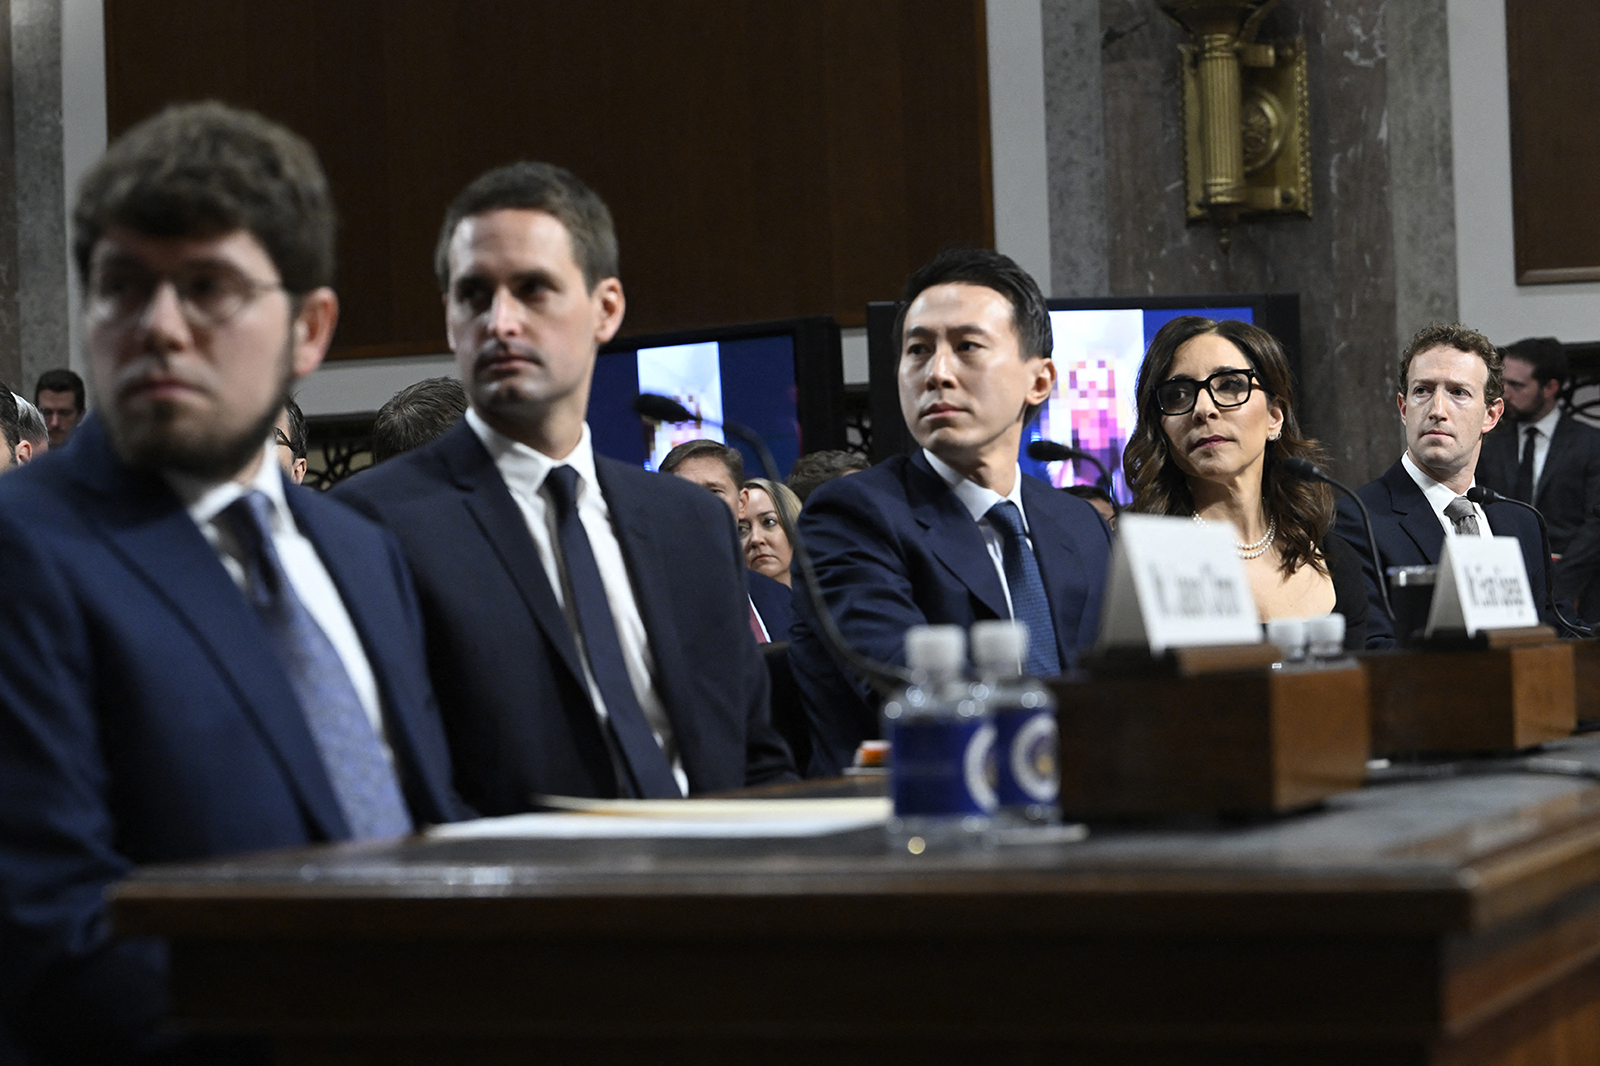 (L-R) Jason Citron, CEO of Discord; Evan Spiegel, CEO of Snap; Shou Zi Chew, CEO of TikTok; Linda Yaccarino, CEO of X; and Mark Zuckerberg, CEO of Meta, watched a video of victims before testifying at the US Senate Judiciary Committee hearing.